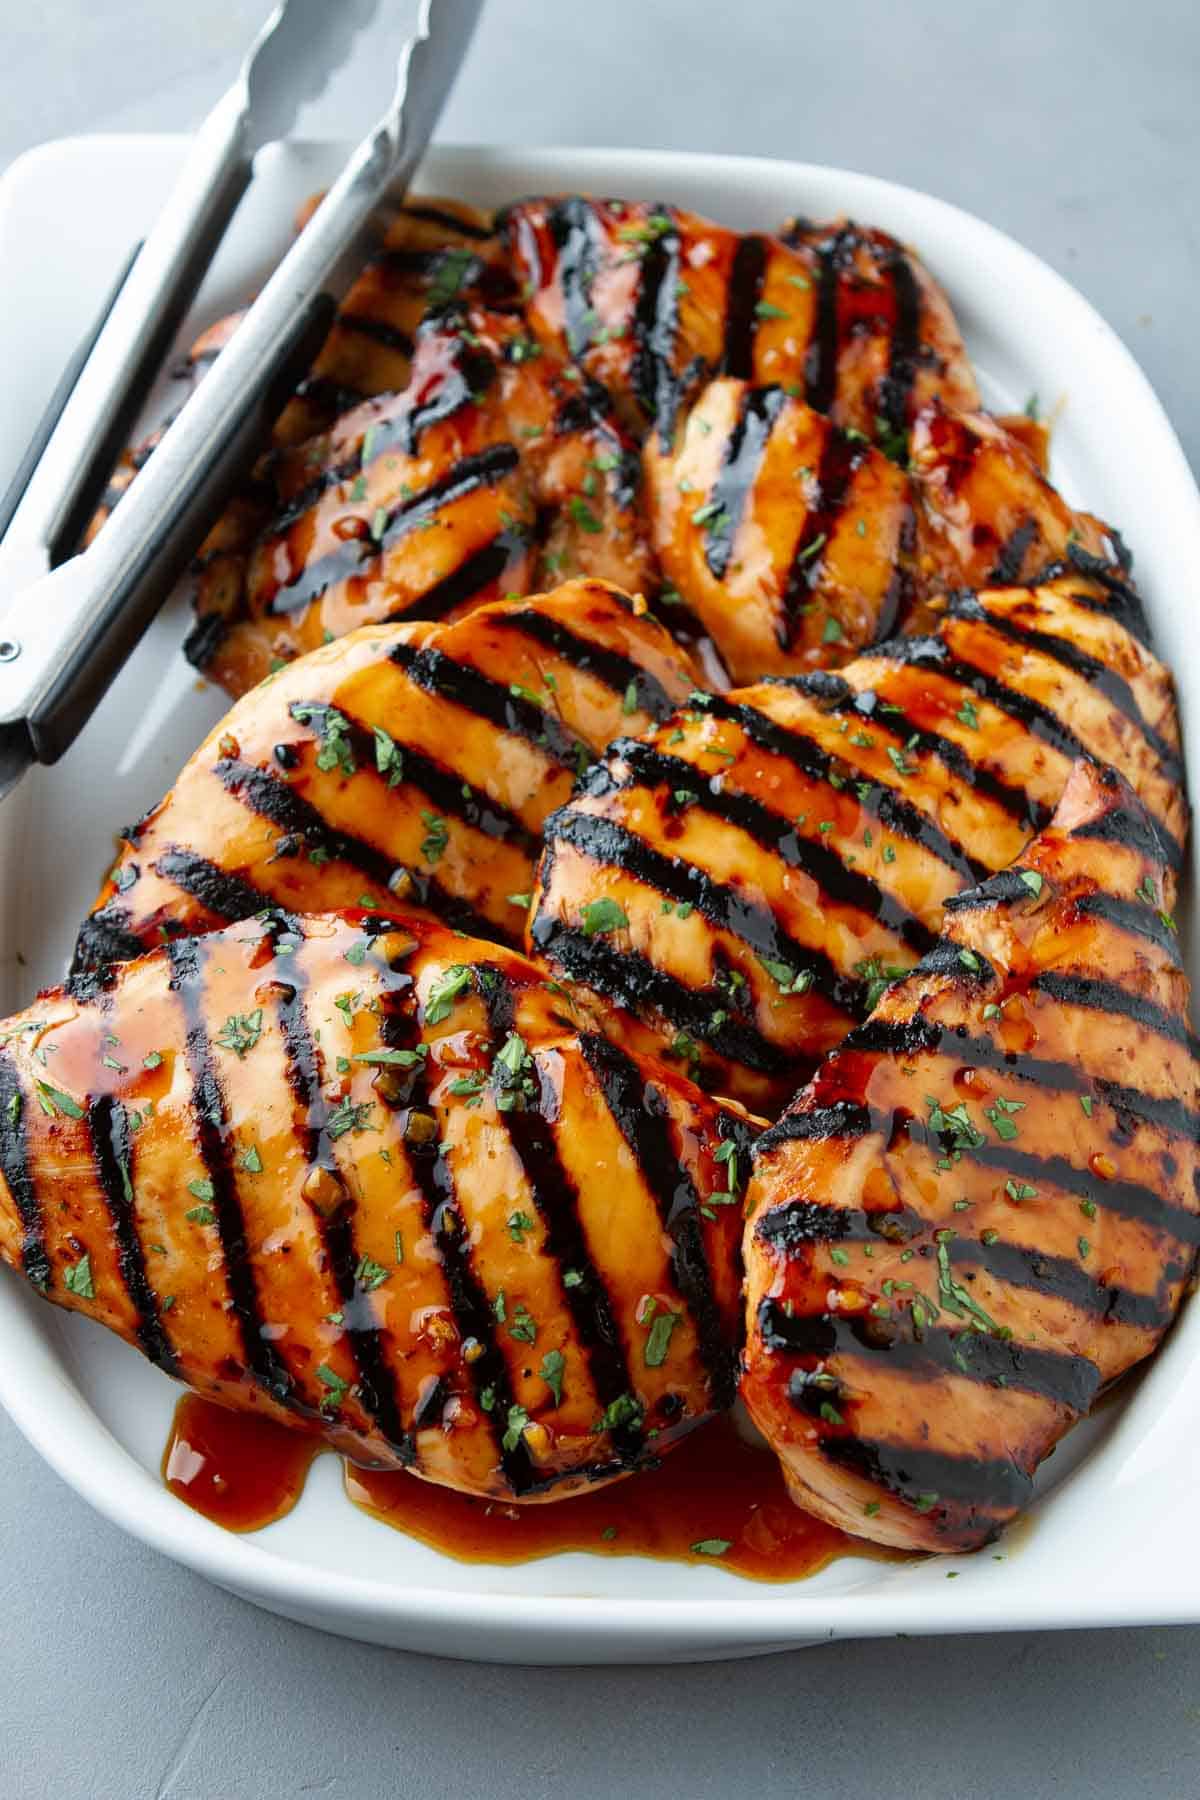 Grilled soy sauce chicken is a must for any backyard bbq meal. The chicken is marinated in a sweet and savory soy honey marinade, cooked until tender and juicy and drizzled with the thickened sauce.